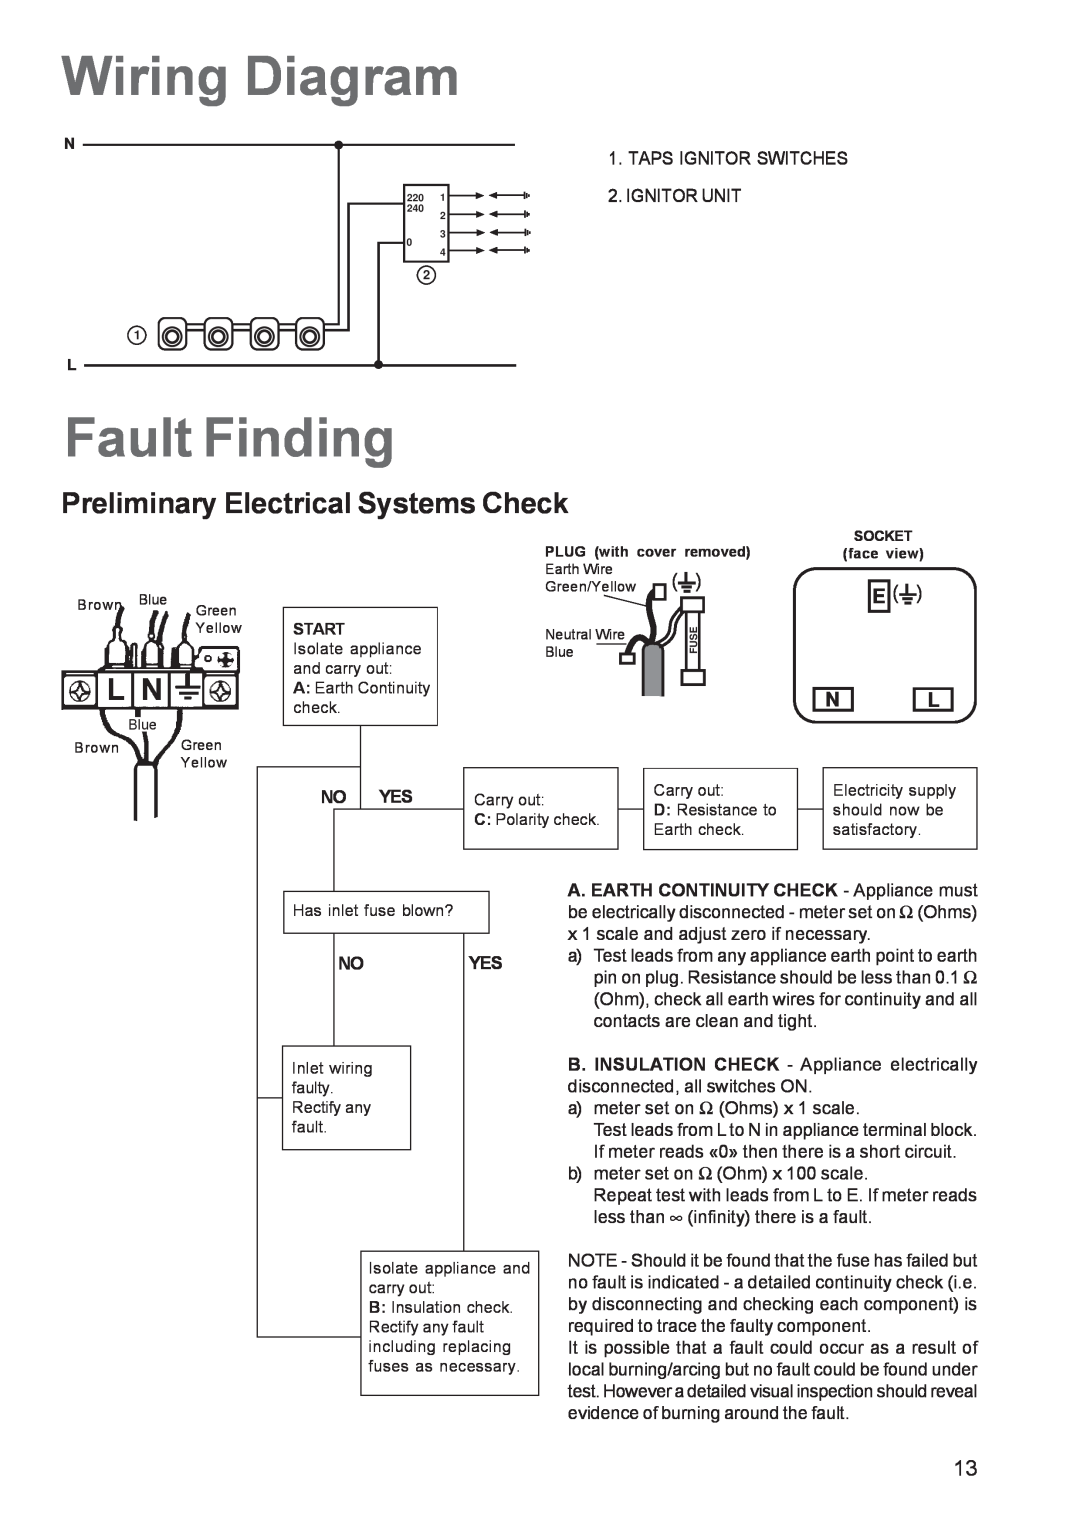 Zanussi ZGF 682, ZGF 692 manual Wiring Diagram, Fault Finding, Preliminary Electrical Systems Check 